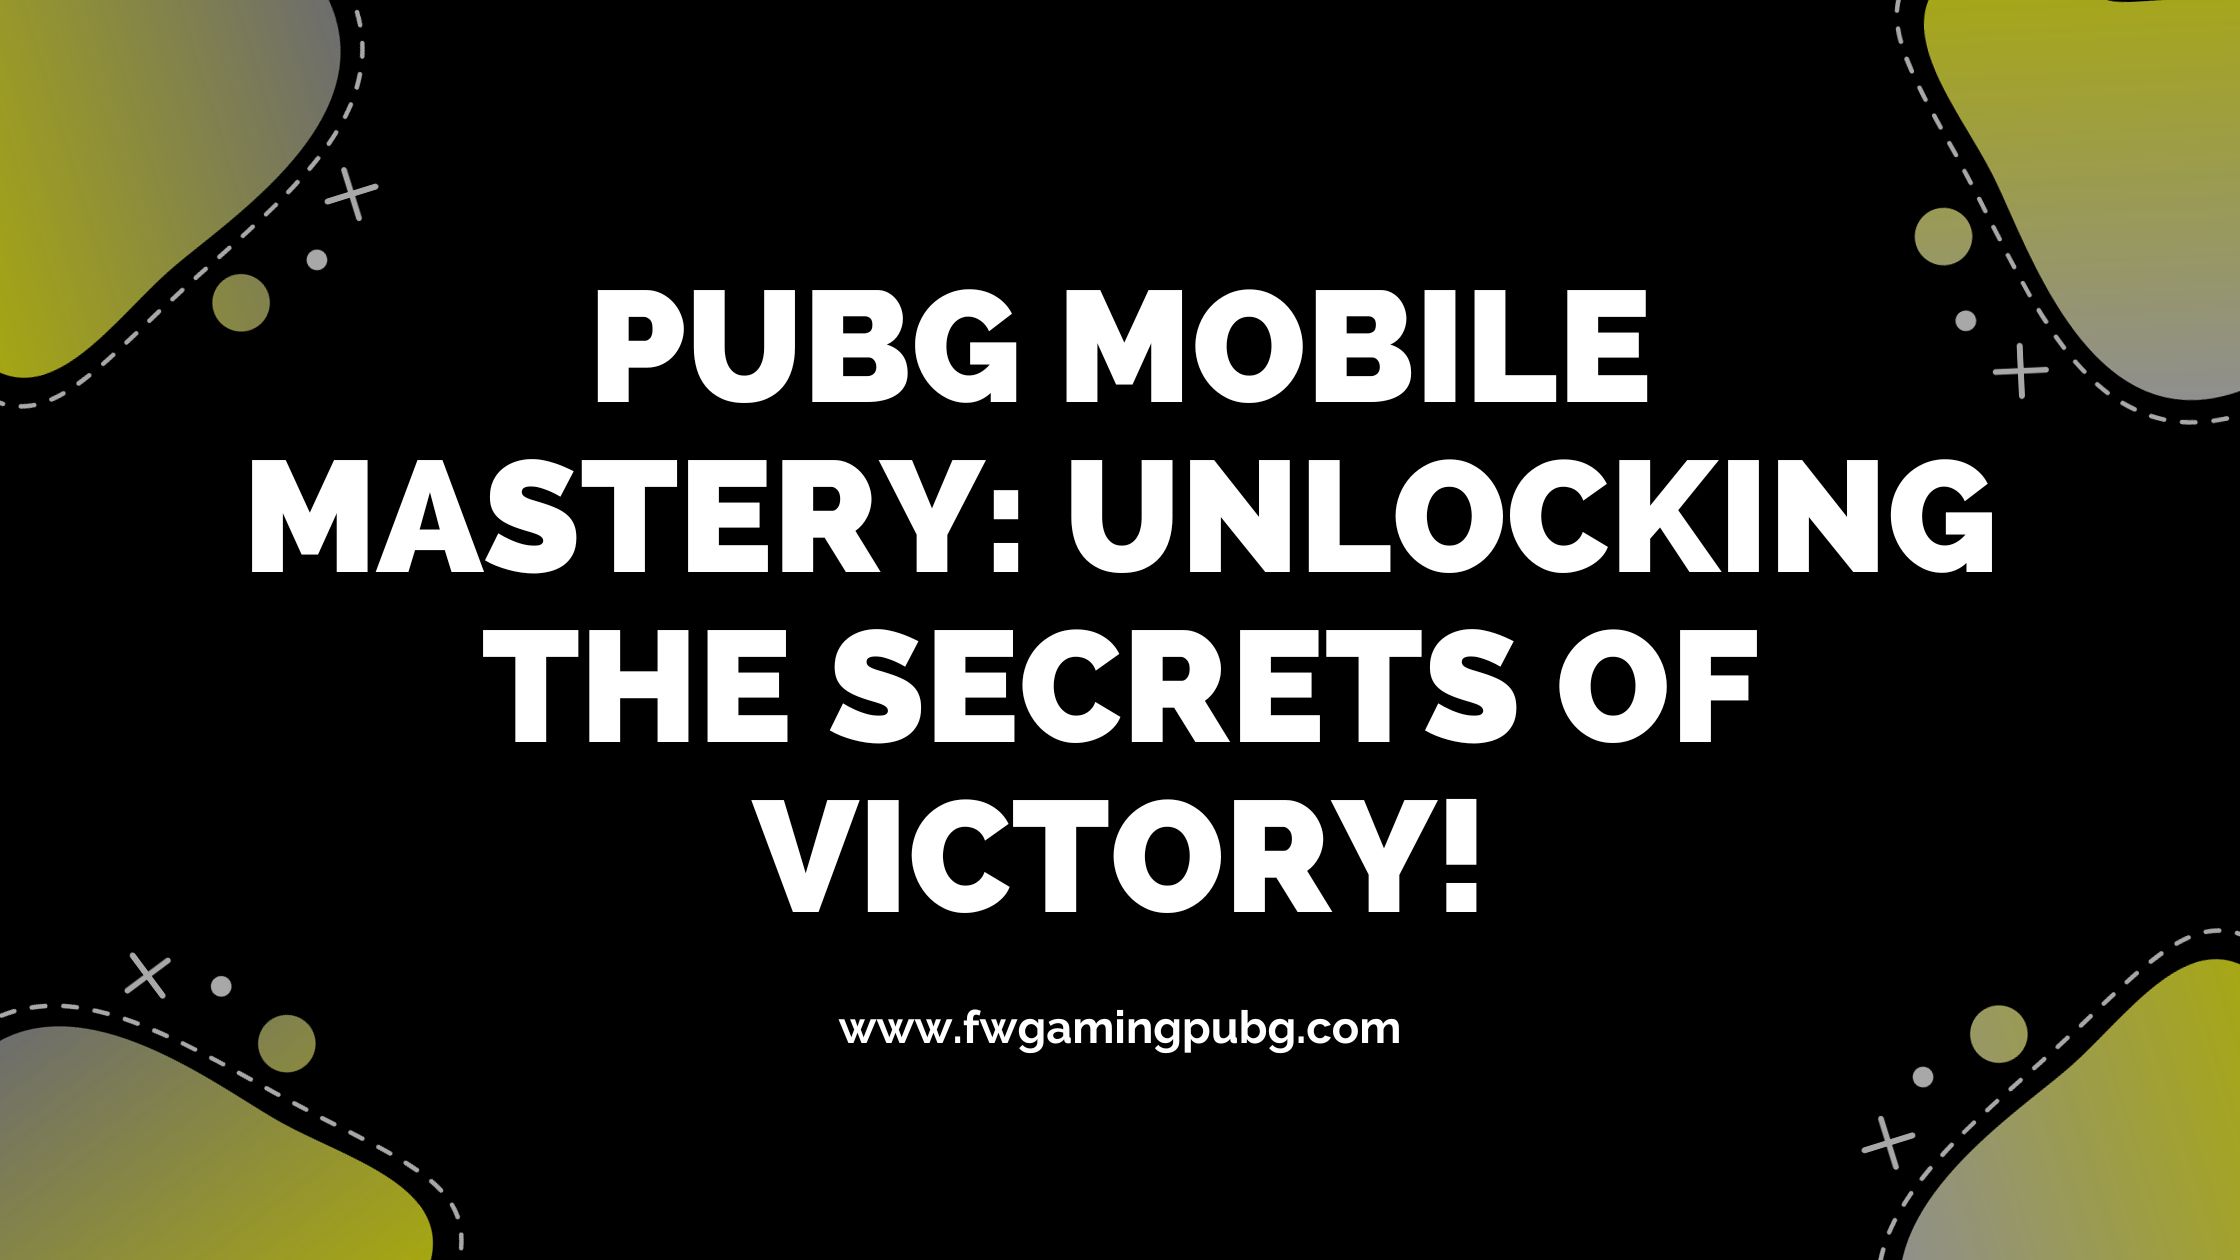 PUBG MOBILE Mastery: Unlocking the Secrets of Victory!